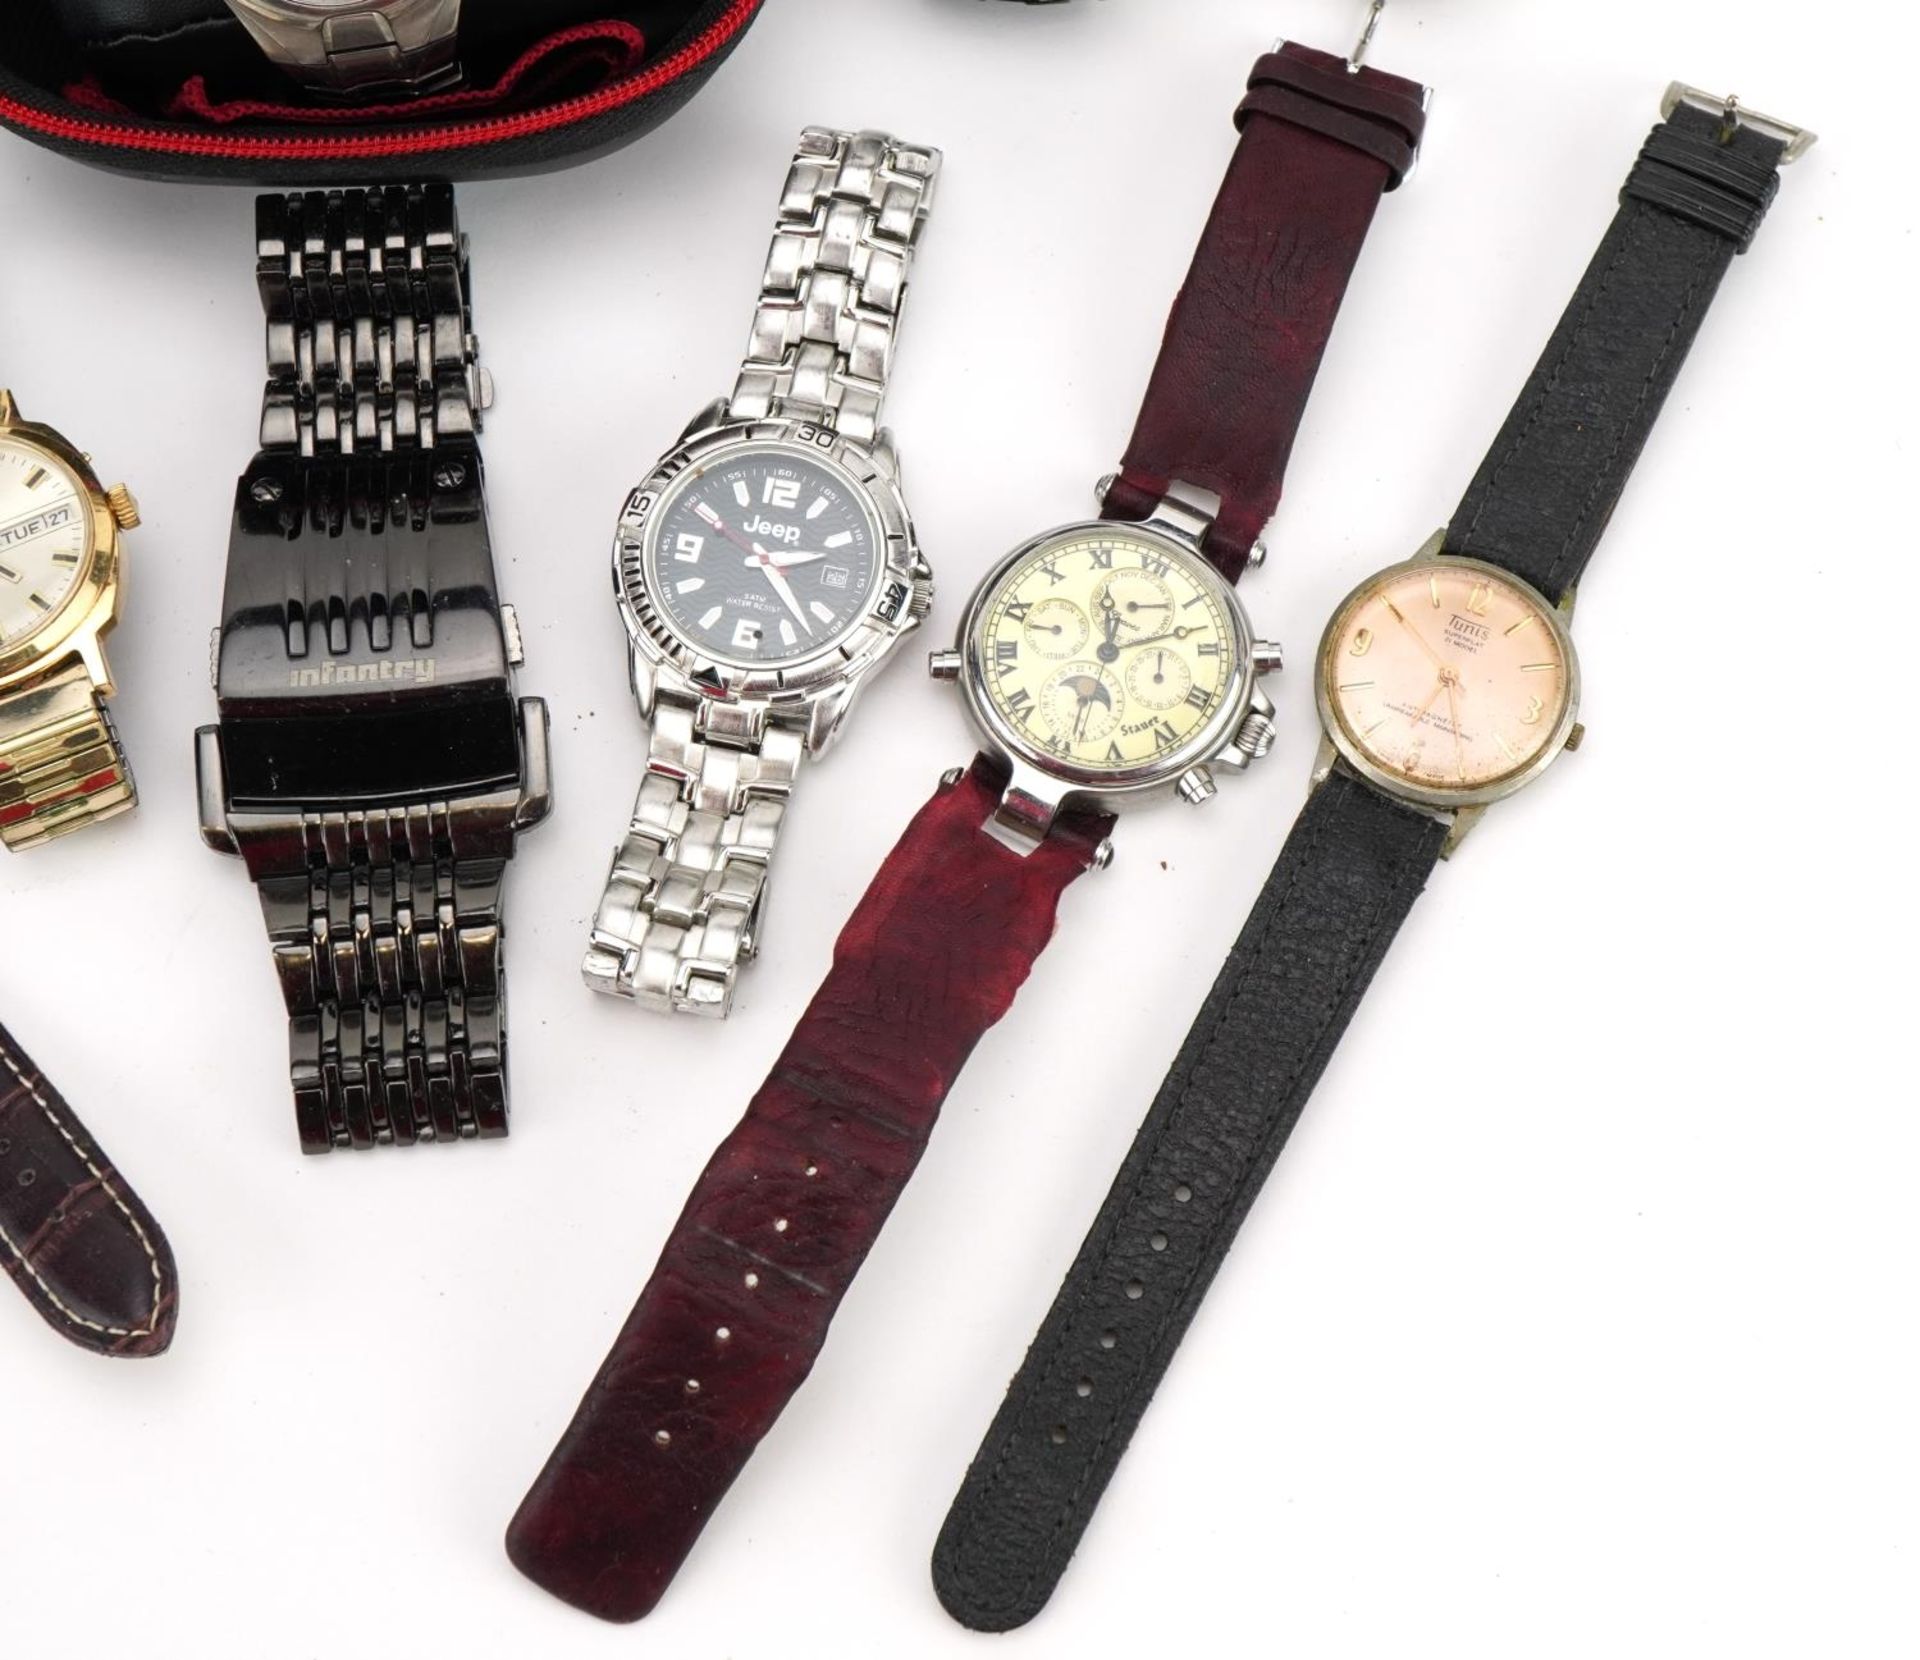 Vintage and later ladies and gentlemen's wristwatches including Sekonda, Tissot and Stauer - Image 4 of 4